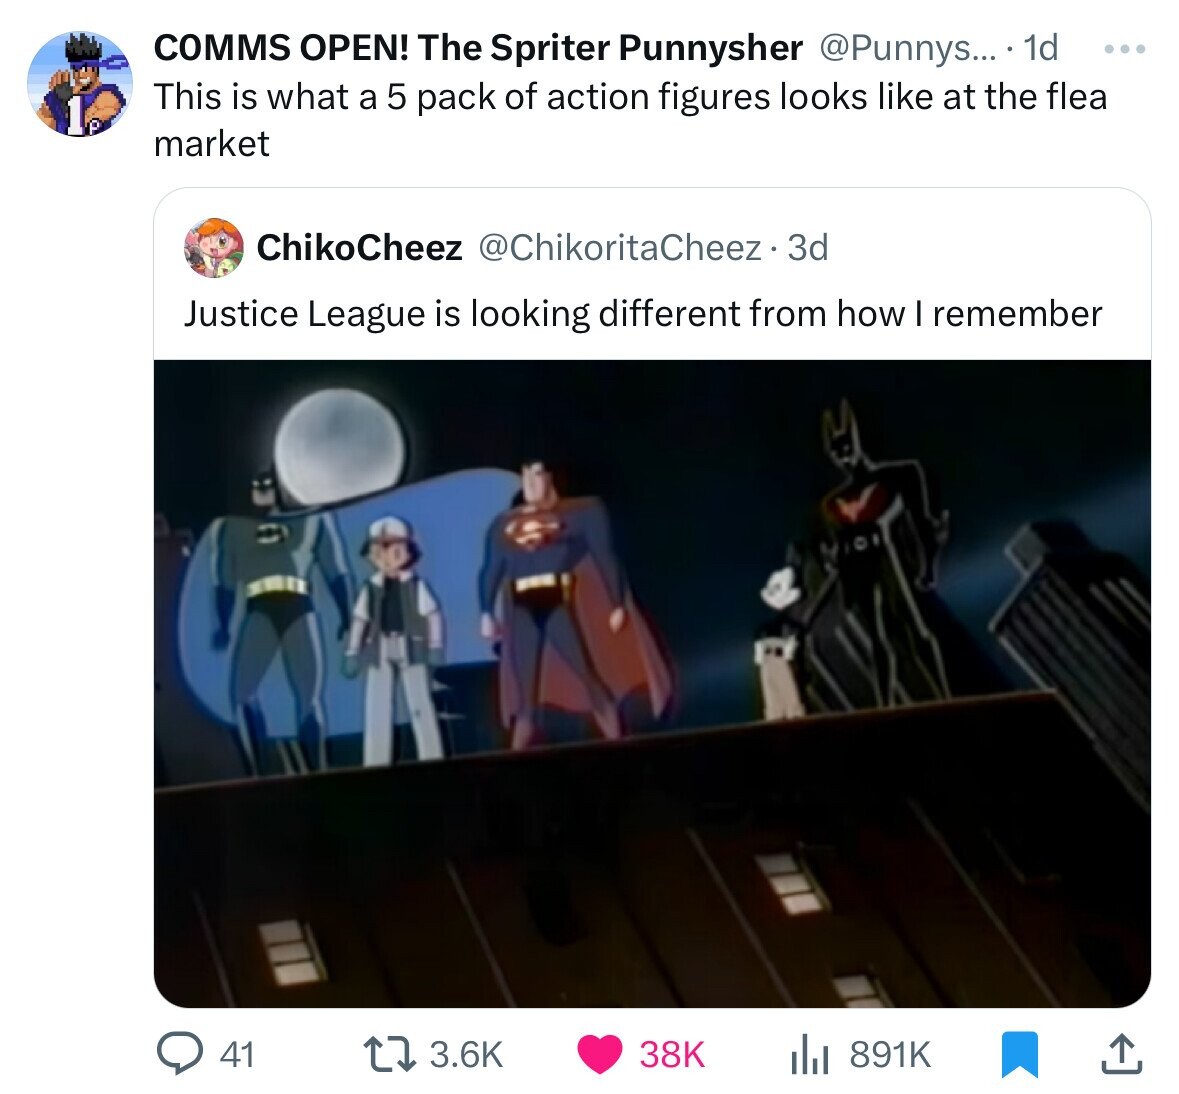 screenshot - Comms Open! The Spriter Punnysher .... 1d This is what a 5 pack of action figures looks at the flea market ChikoCheez 3d Justice League is looking different from how I remember 41 38K l